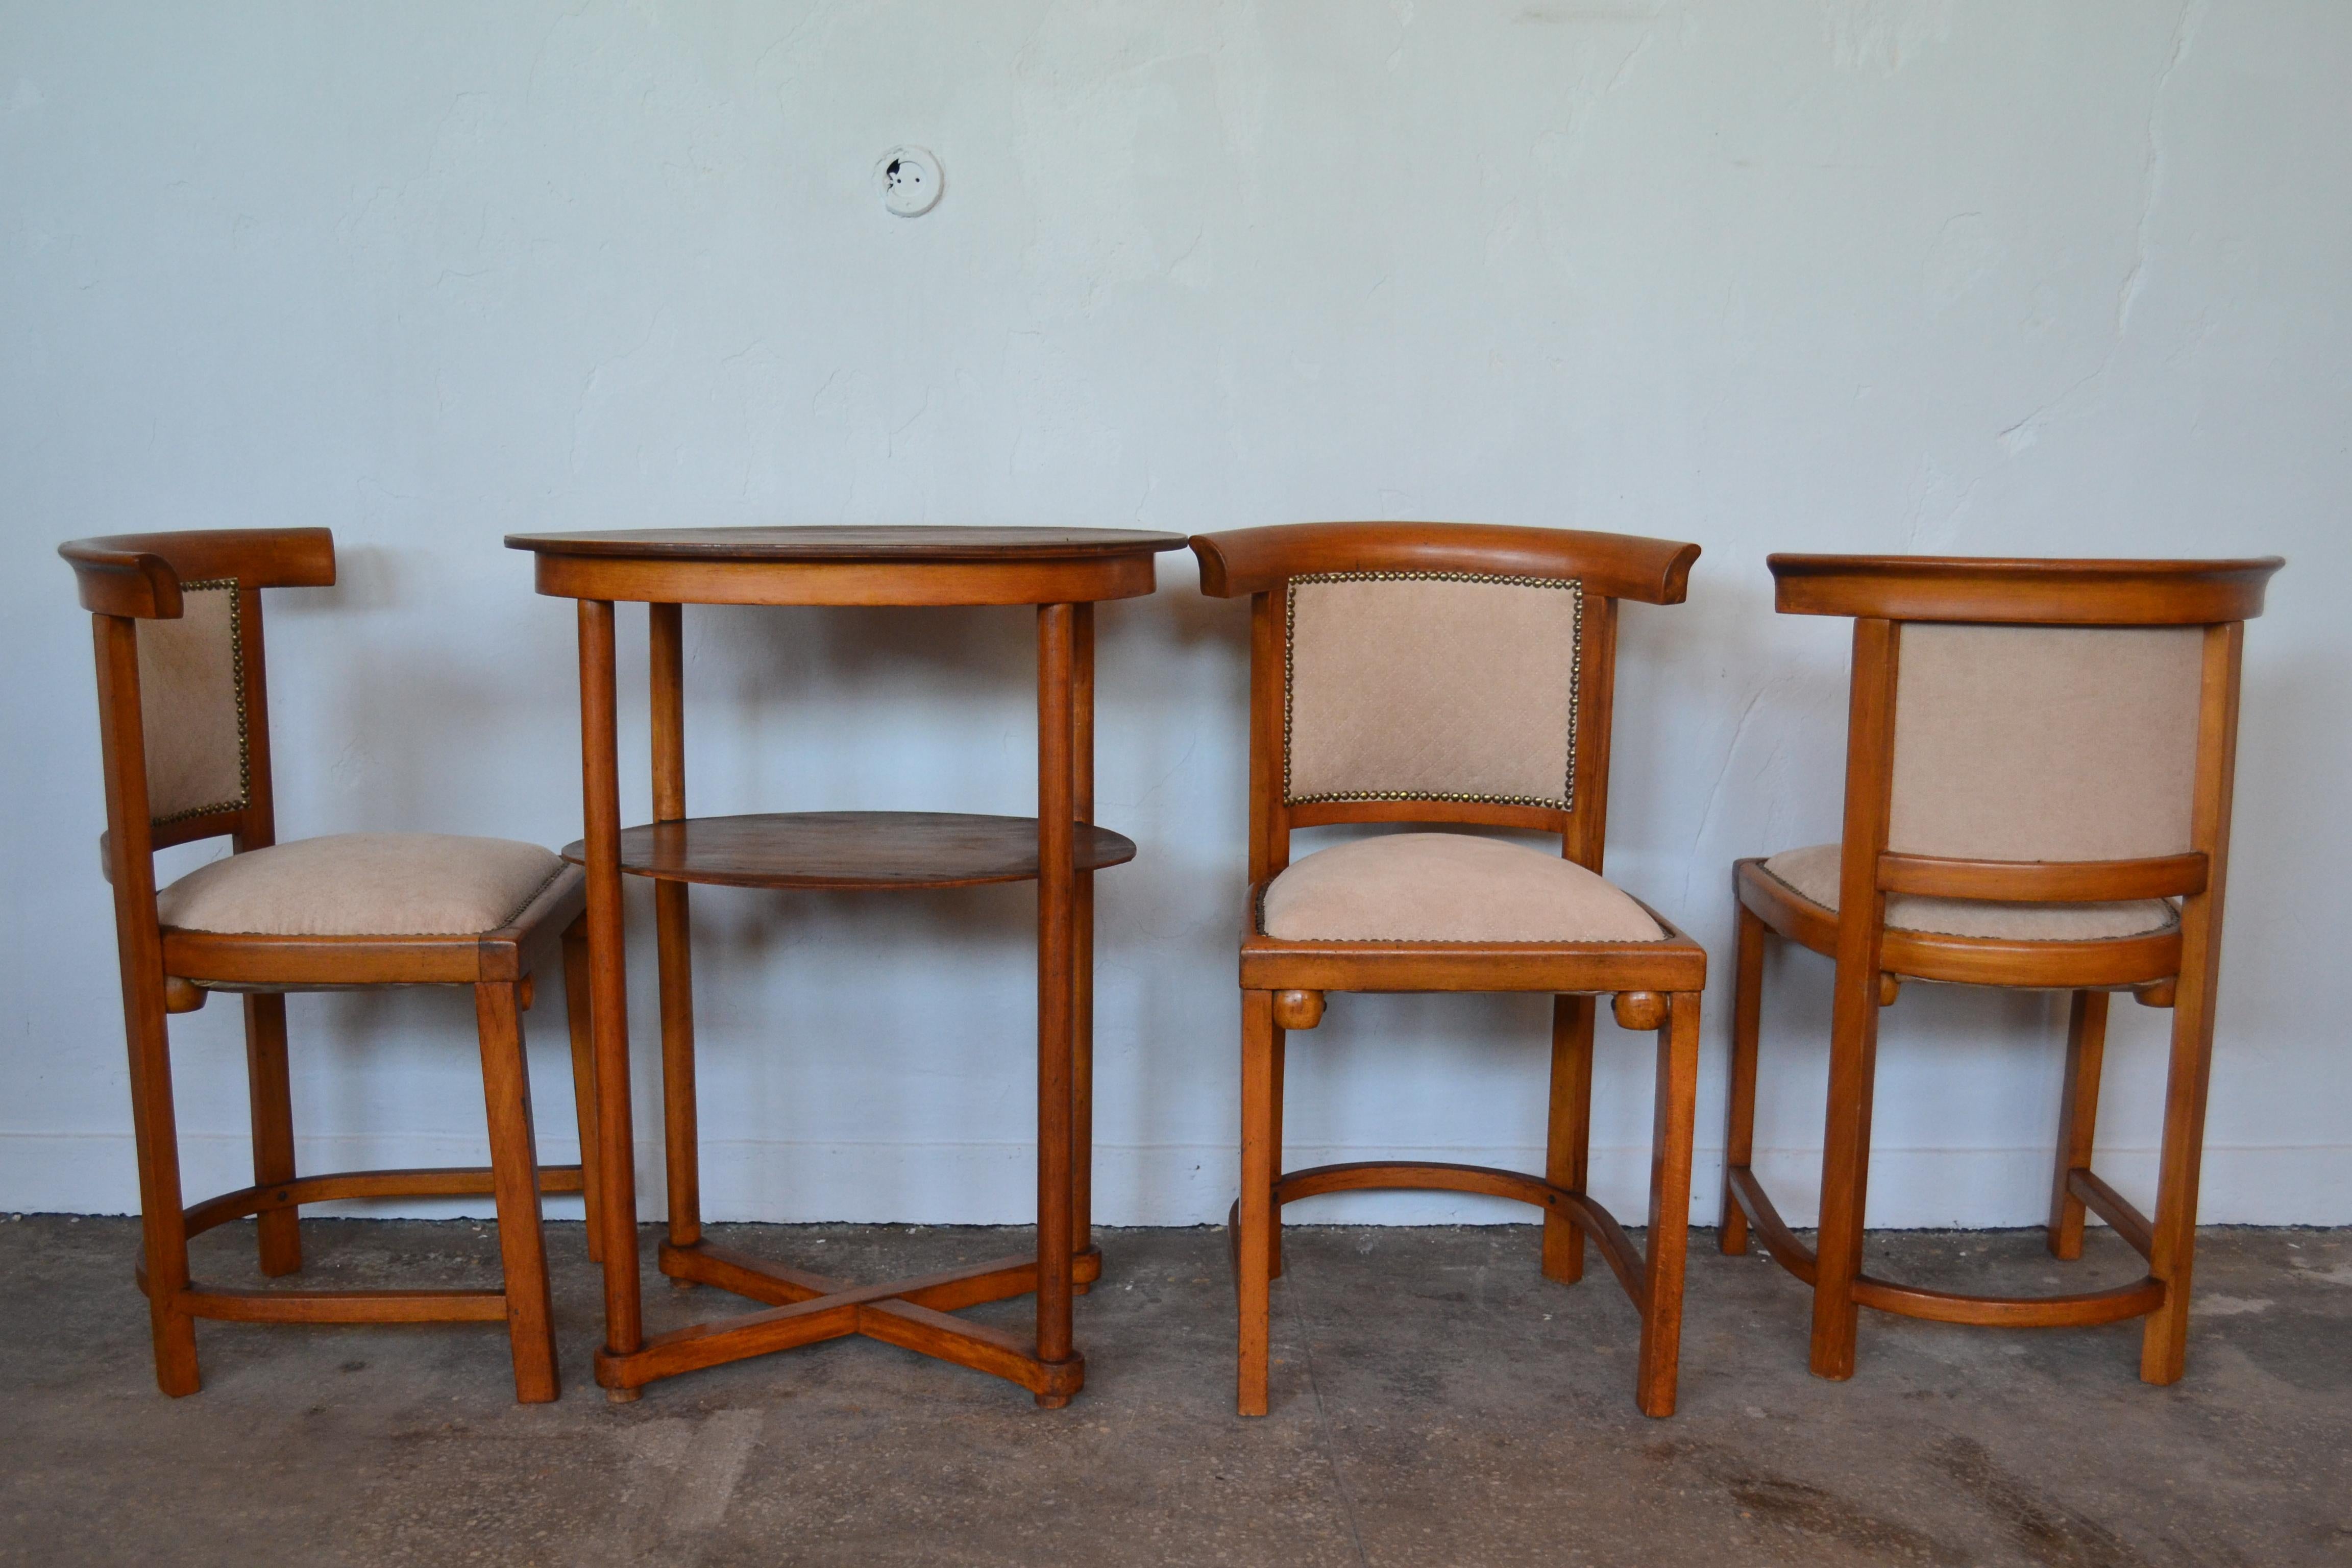 Living Room Set by Josef Hoffmann for Jacob & Josef Kohn, 1905 In Good Condition For Sale In Mazowieckie, PL